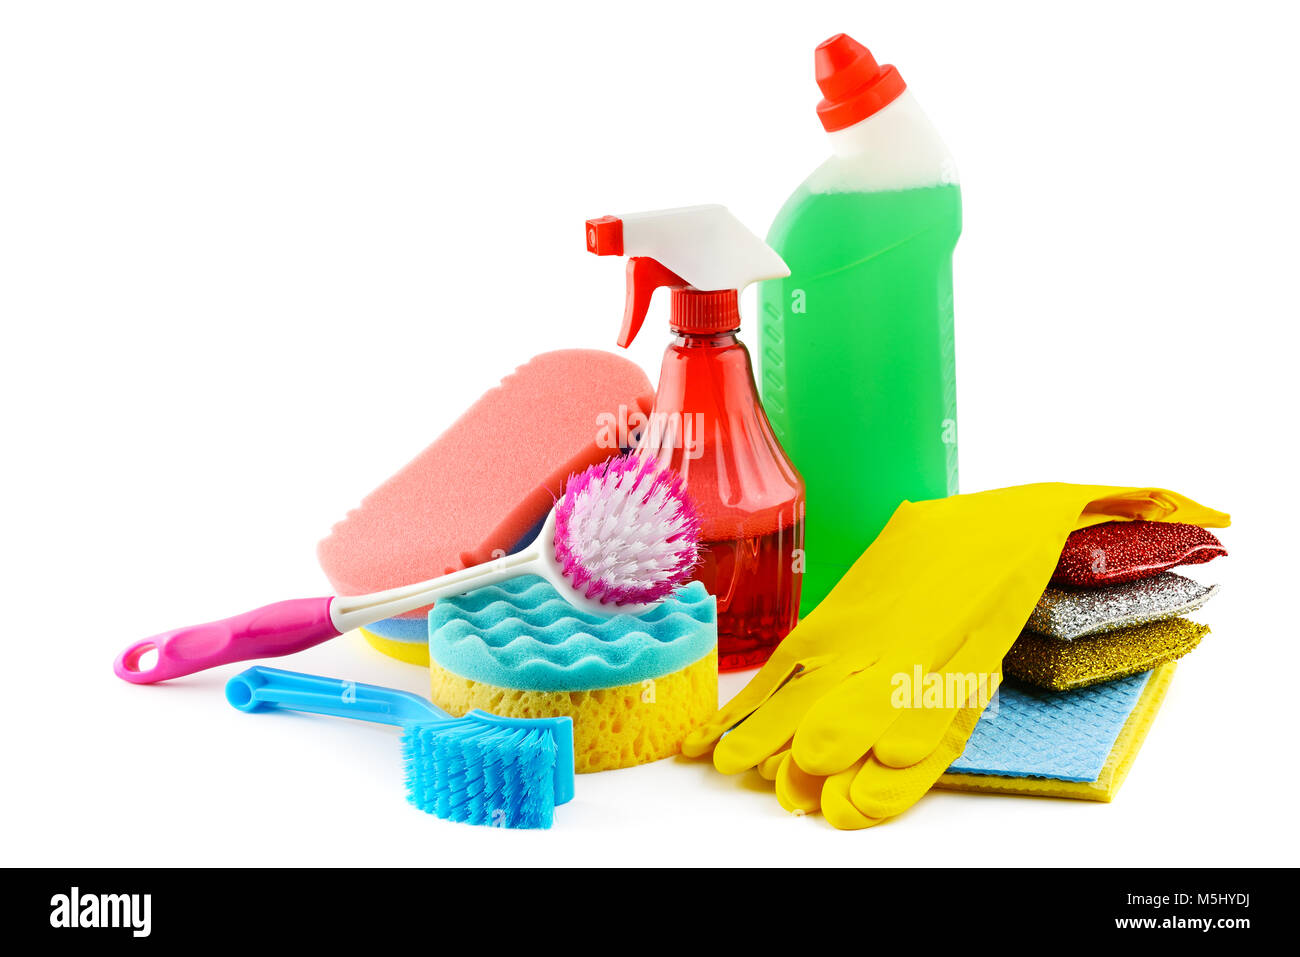 Set cleaners isolated on white background. Detergent, sponges, brush, napkins, rubber gloves Stock Photo